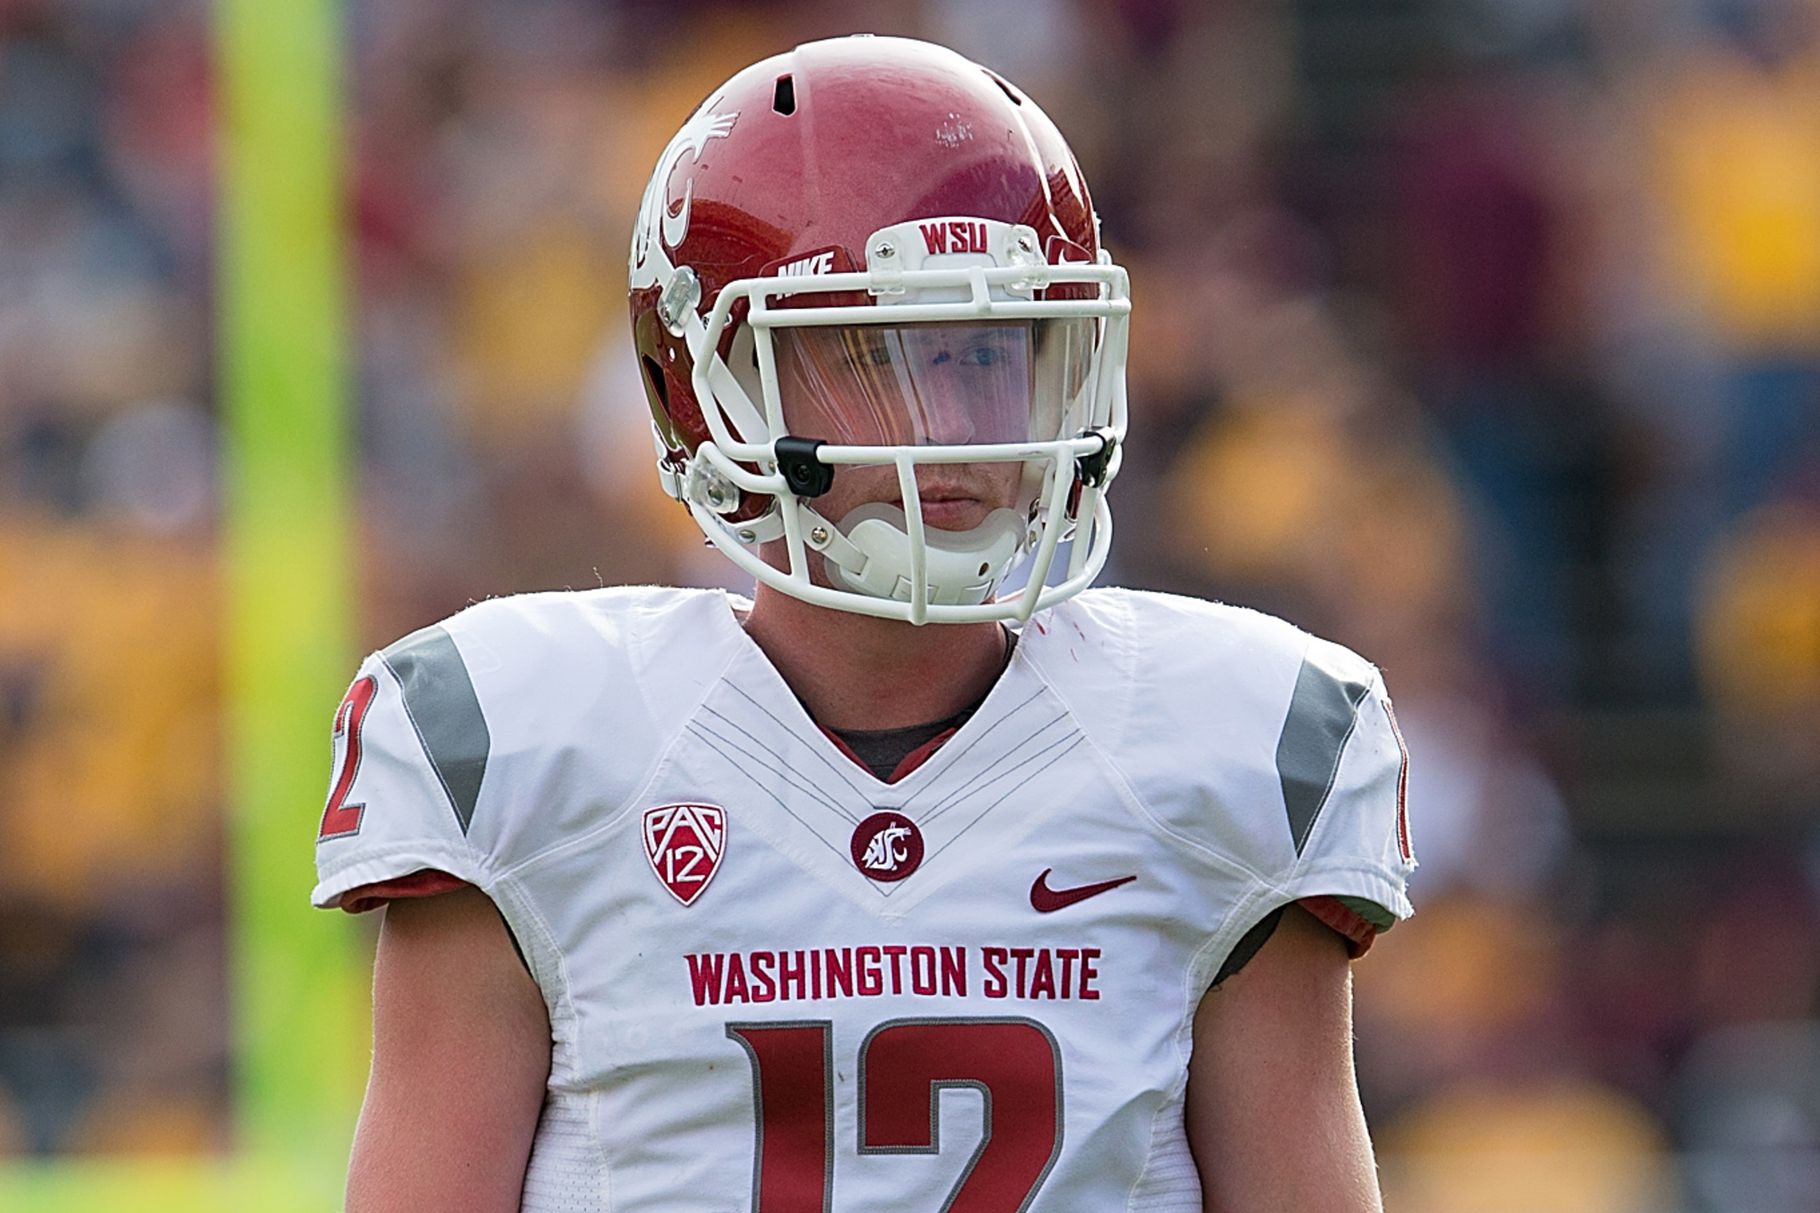 WSU returns to Pullman for day 11 of Fall camp  CougCenter